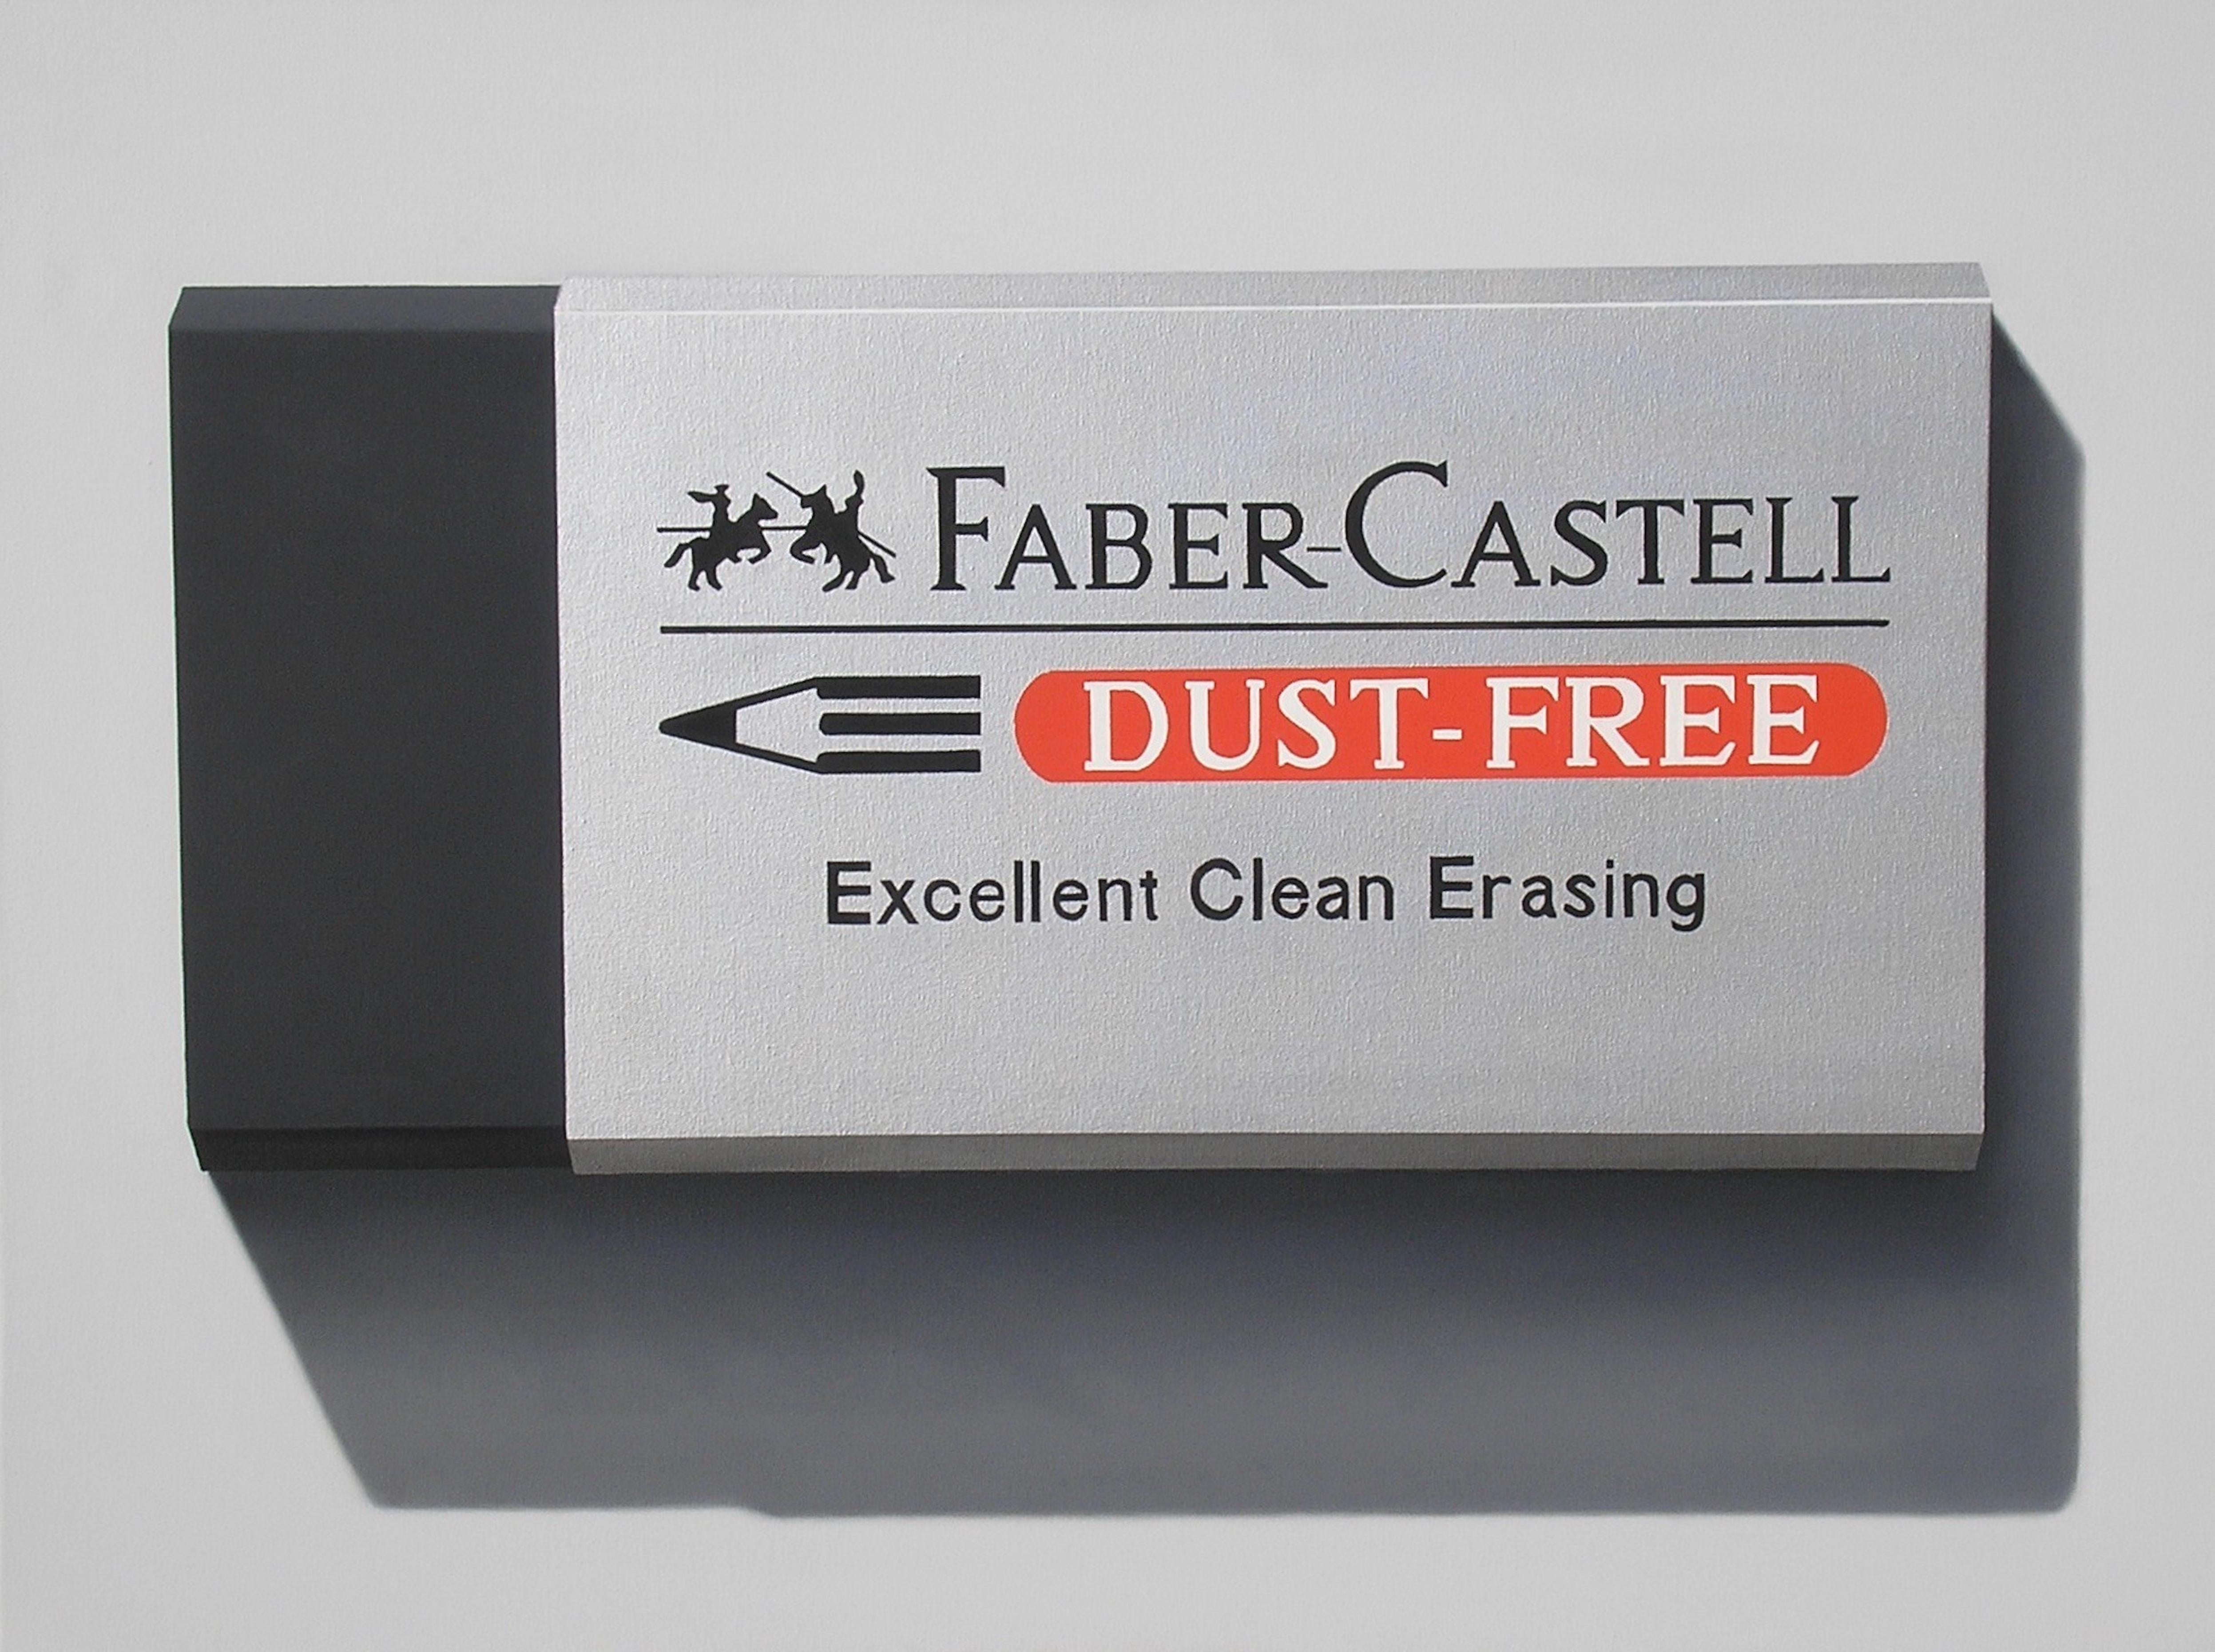 FABER-CASTELL DUST-FREE